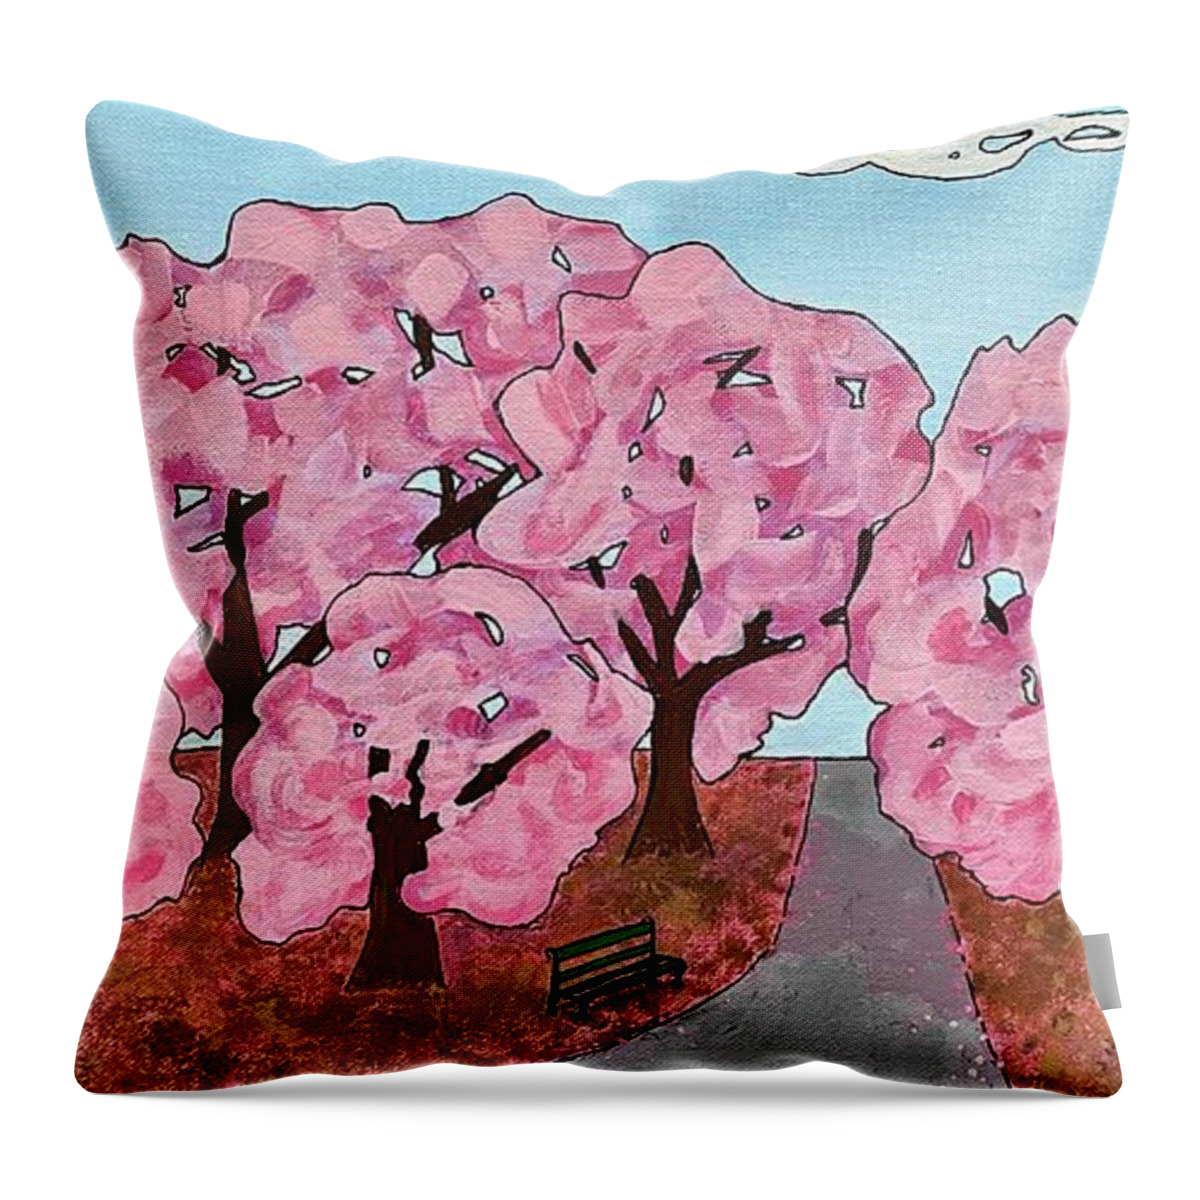 Cherry Trees Throw Pillow featuring the painting Cherry Trees by Wendy Golden